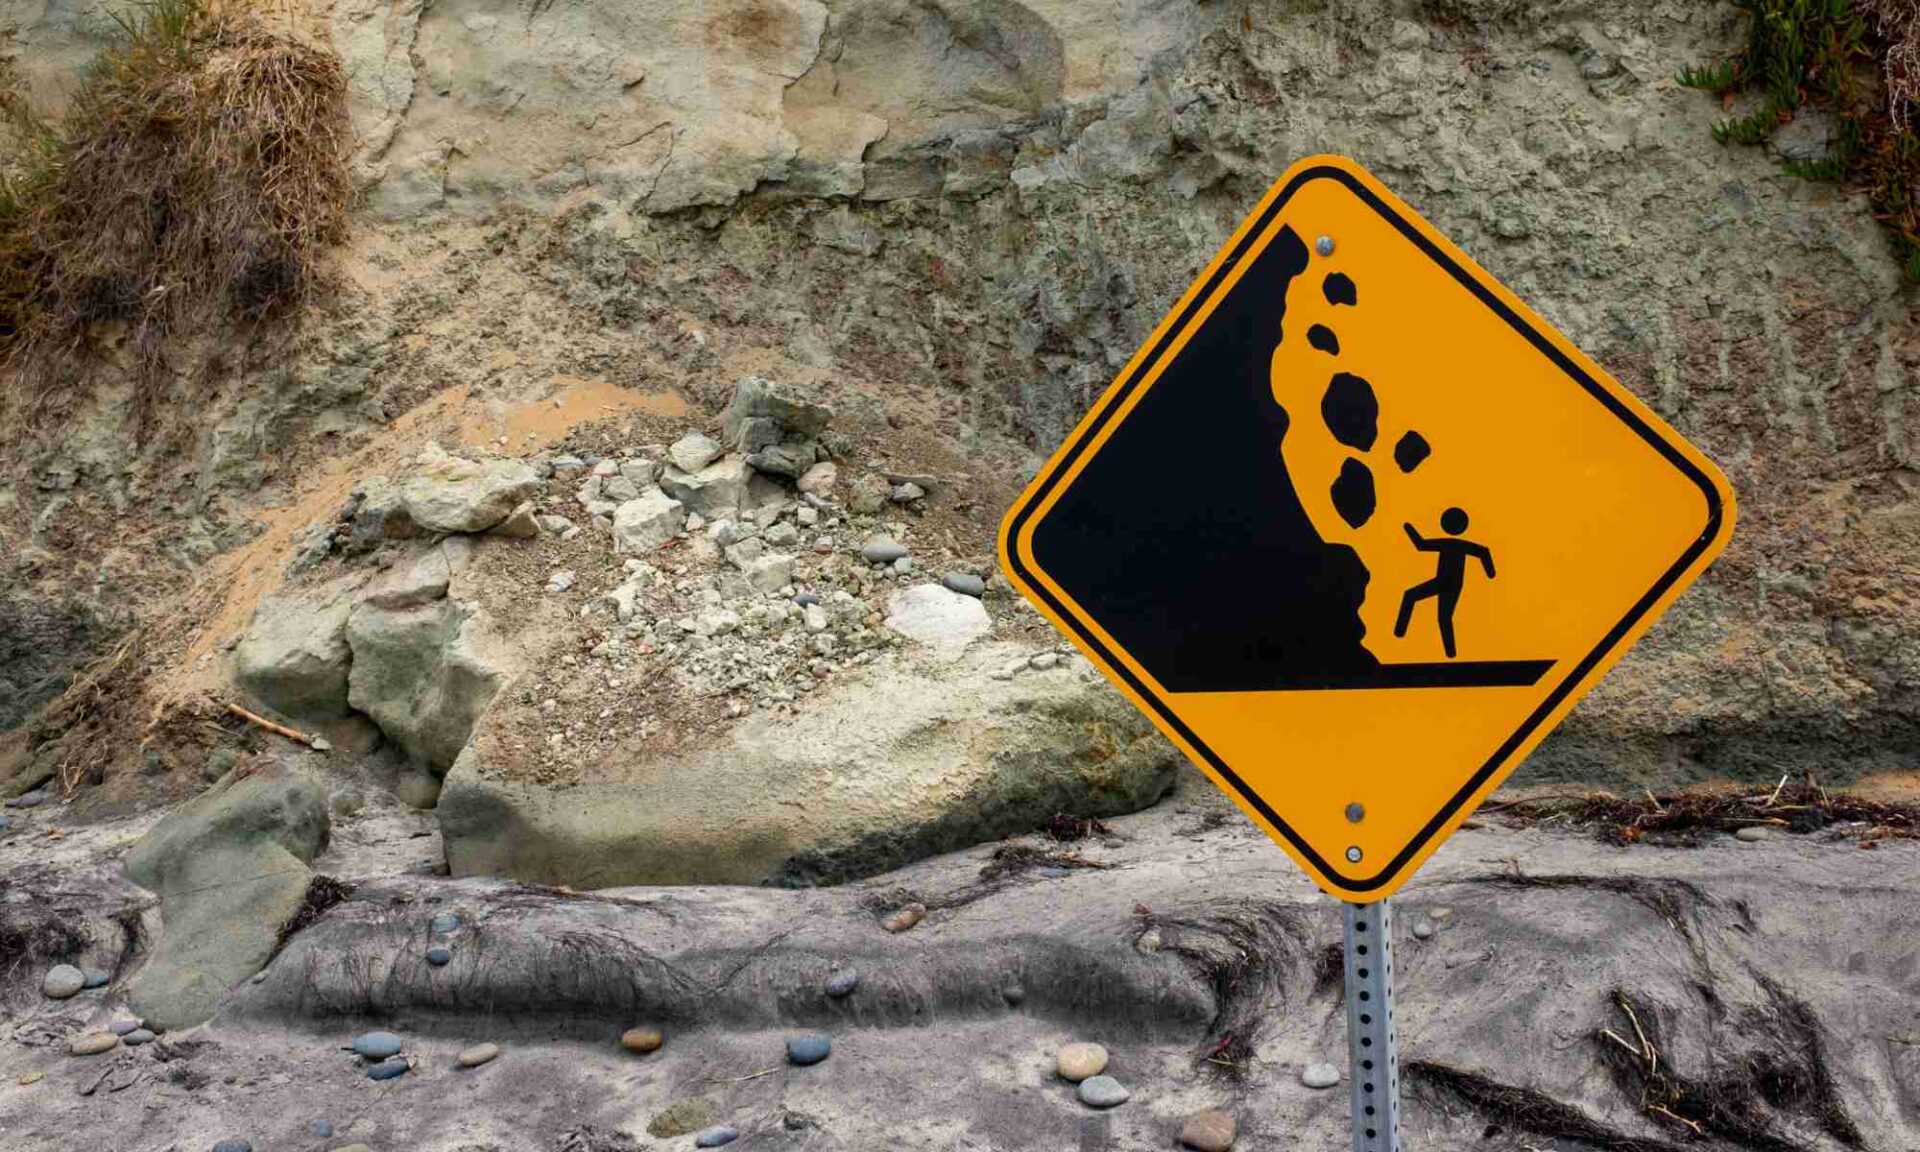 Falling rocks warning sign in front of rocks and boulders of various sizes along a mountainside to illustrate the idea of granular systems.